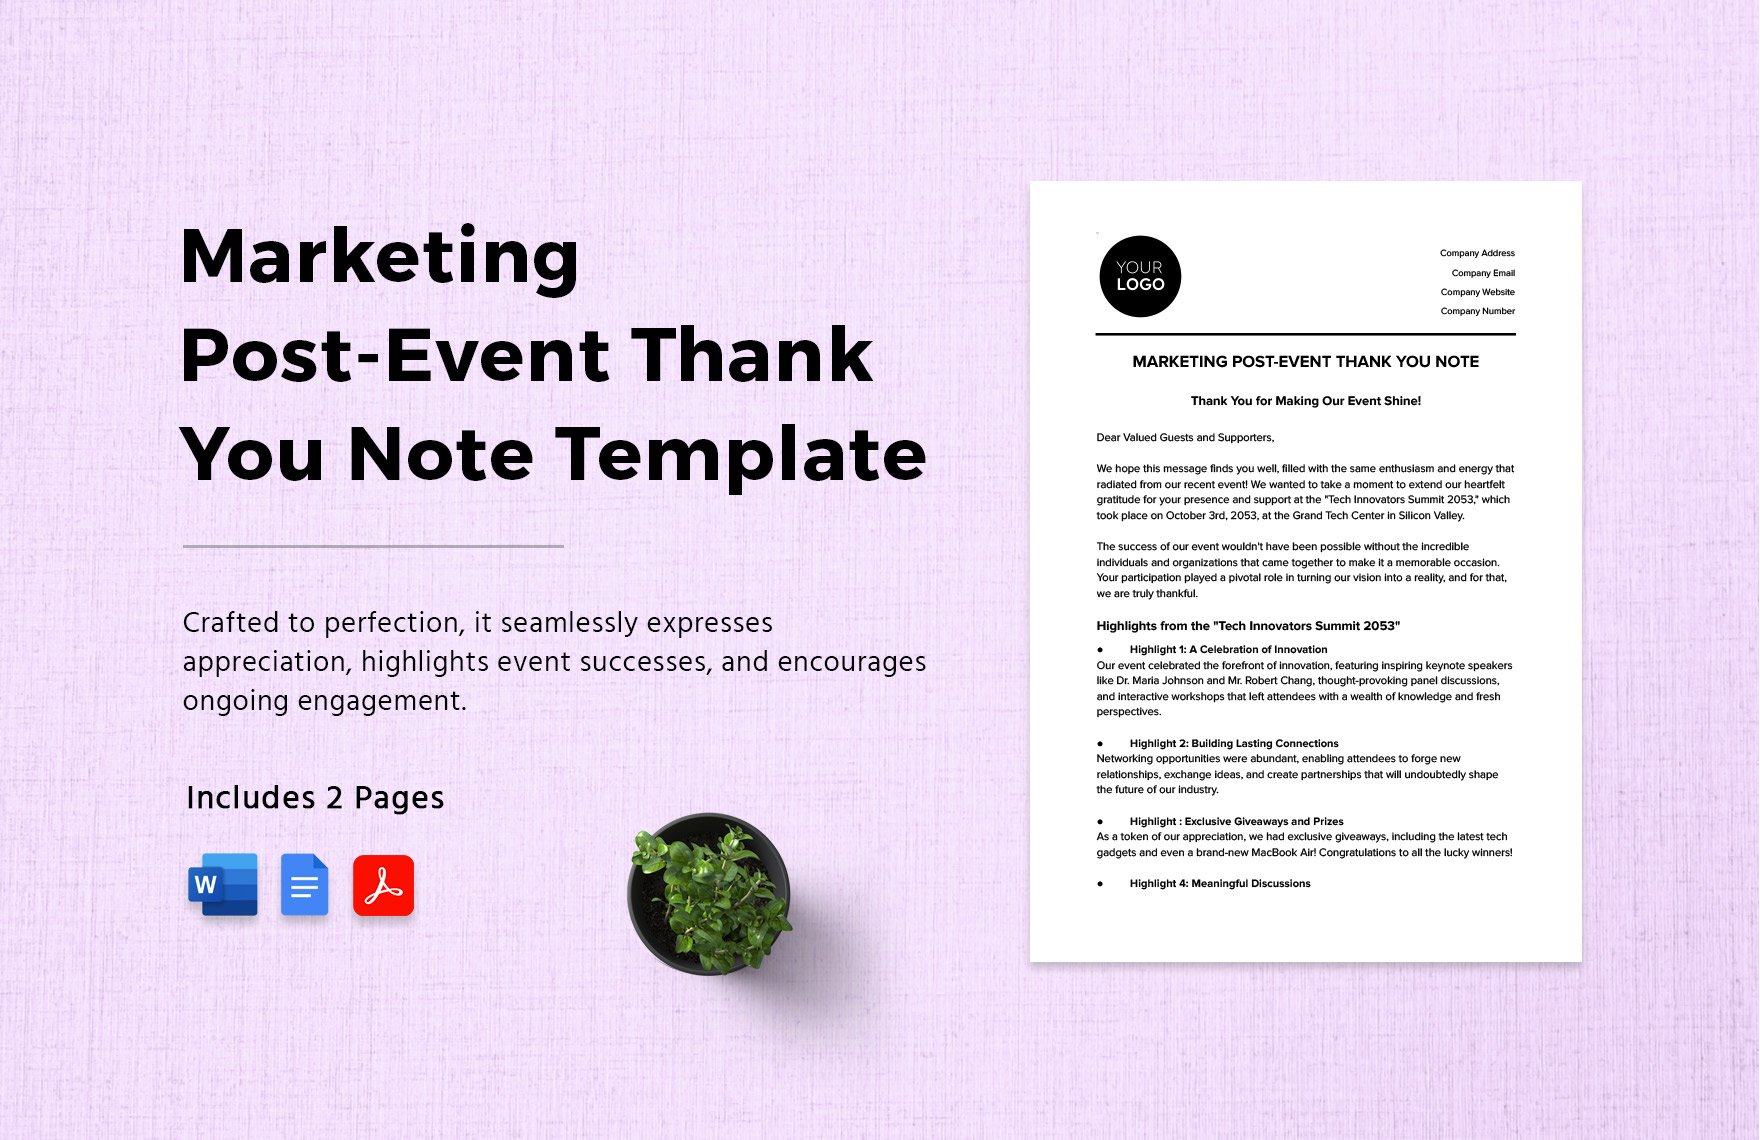 Marketing Post-Event Thank You Note Template